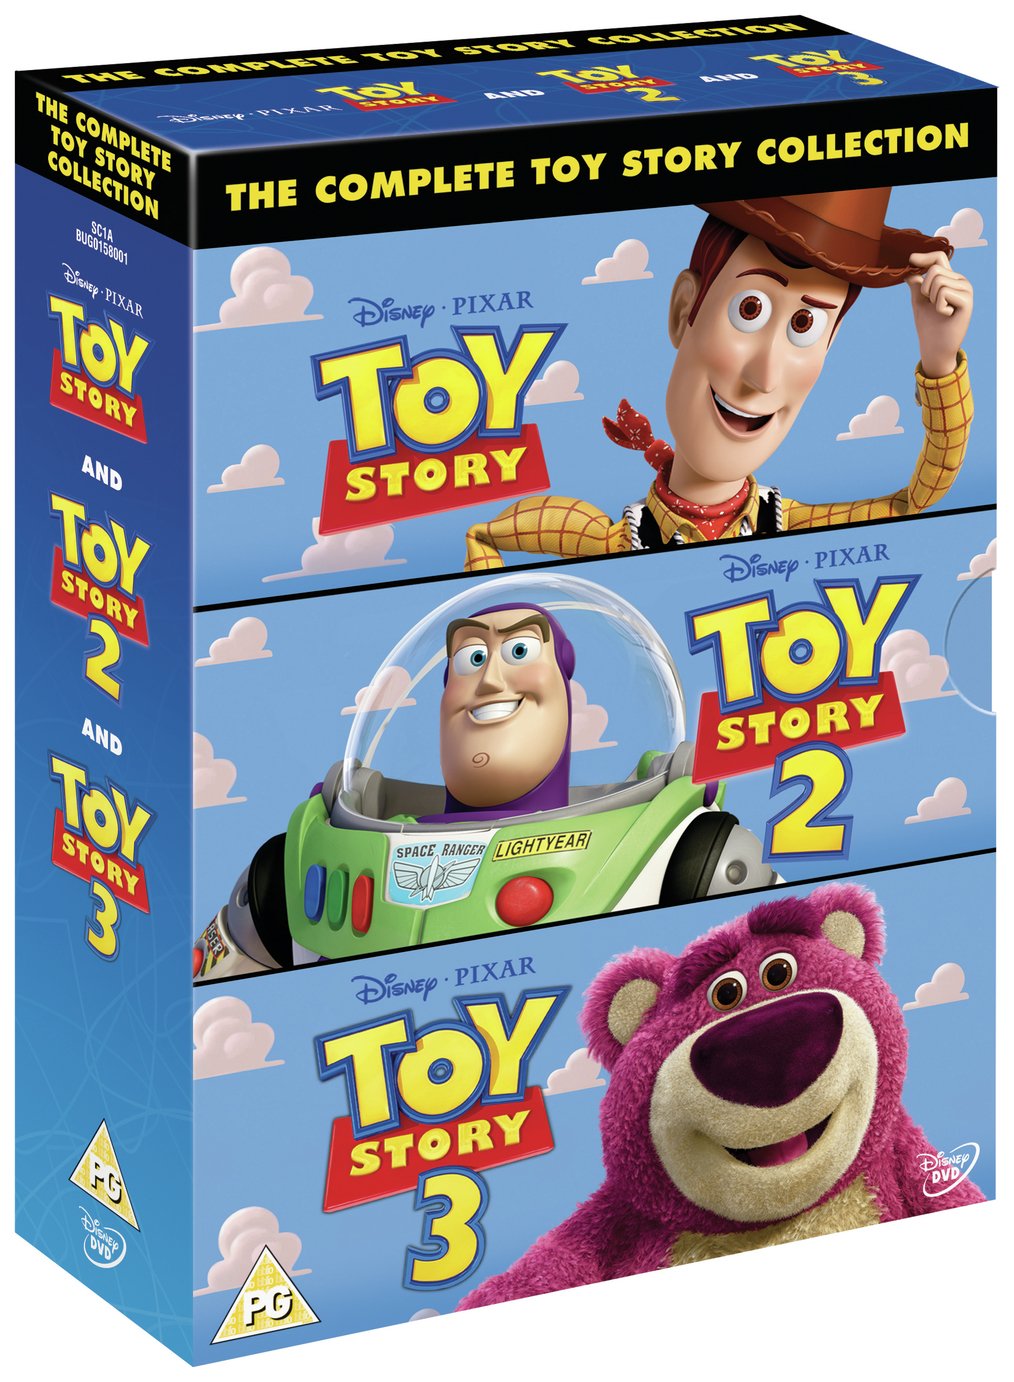 Toy Story 1-3 DVD Box Set review